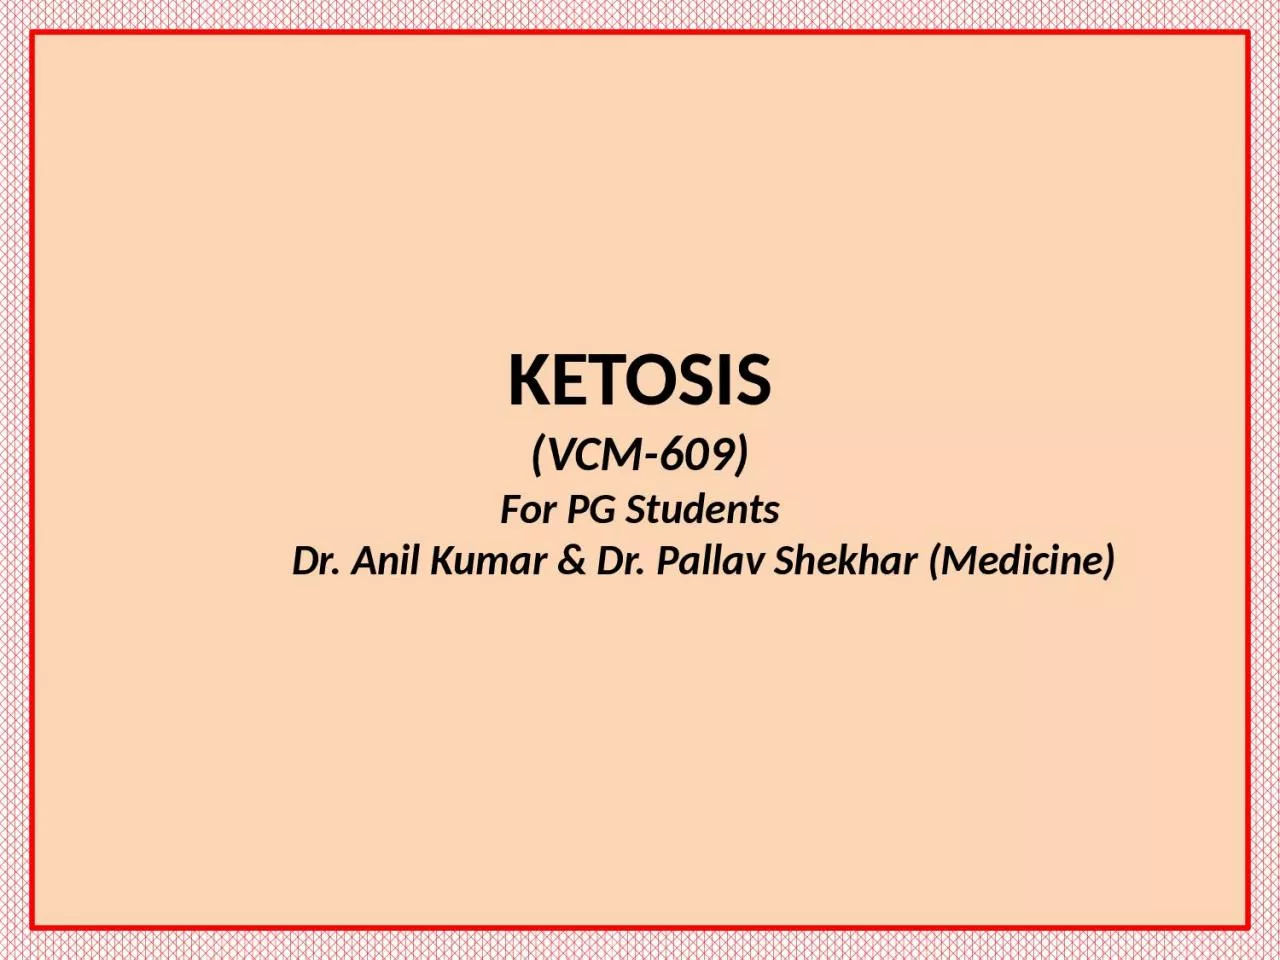 KETOSIS (VCM-609) For PG Students